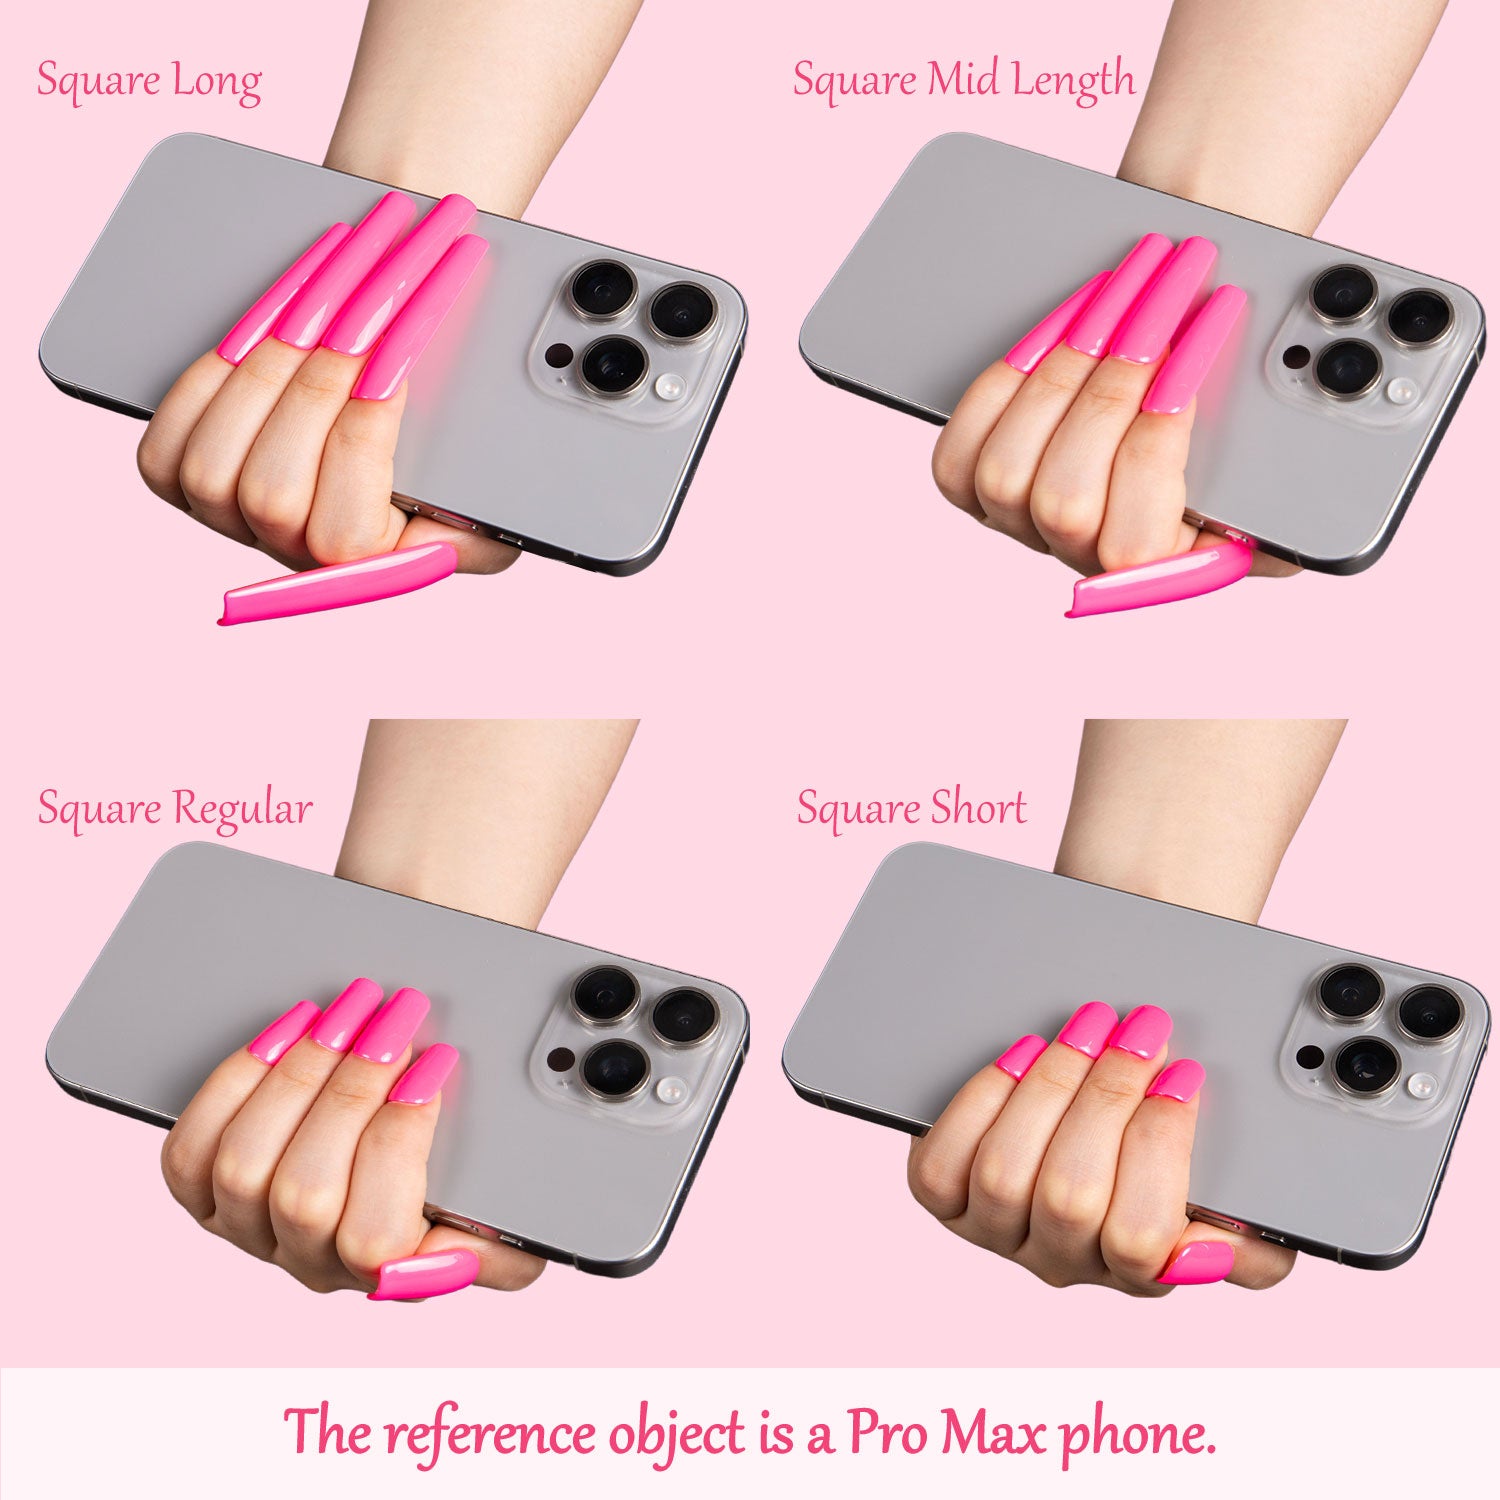 Comparison of four lengths of pink square press-on nails held against a Pro Max phone; labeled as Square Long, Square Mid Length, Square Regular, and Square Short.